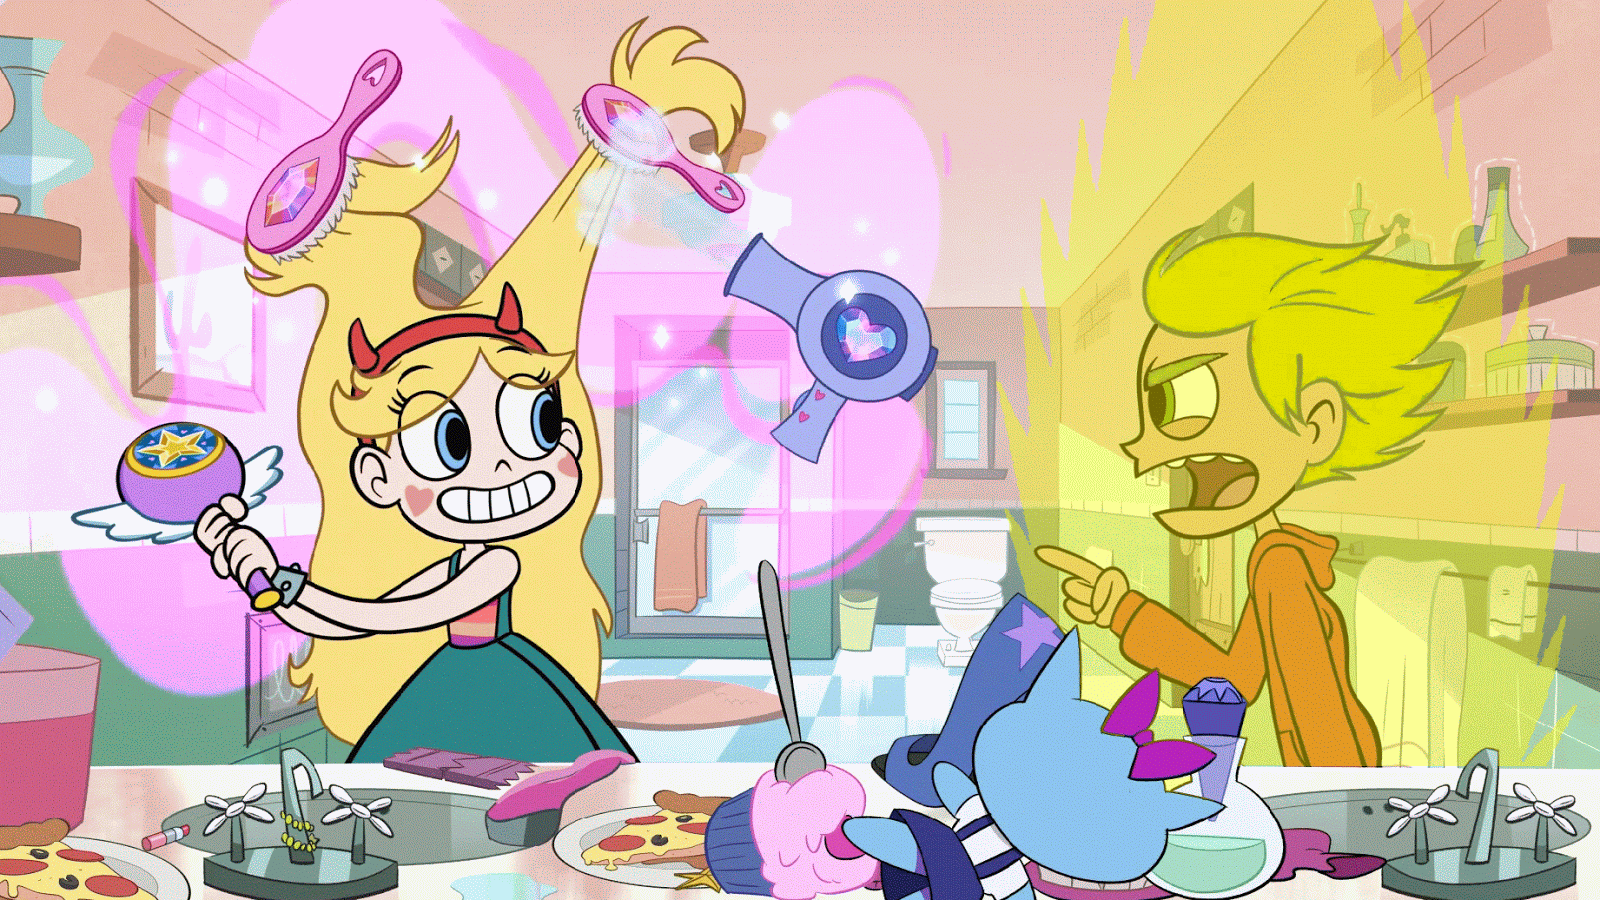 Star Vs The Forces Of Evil Wallpaper